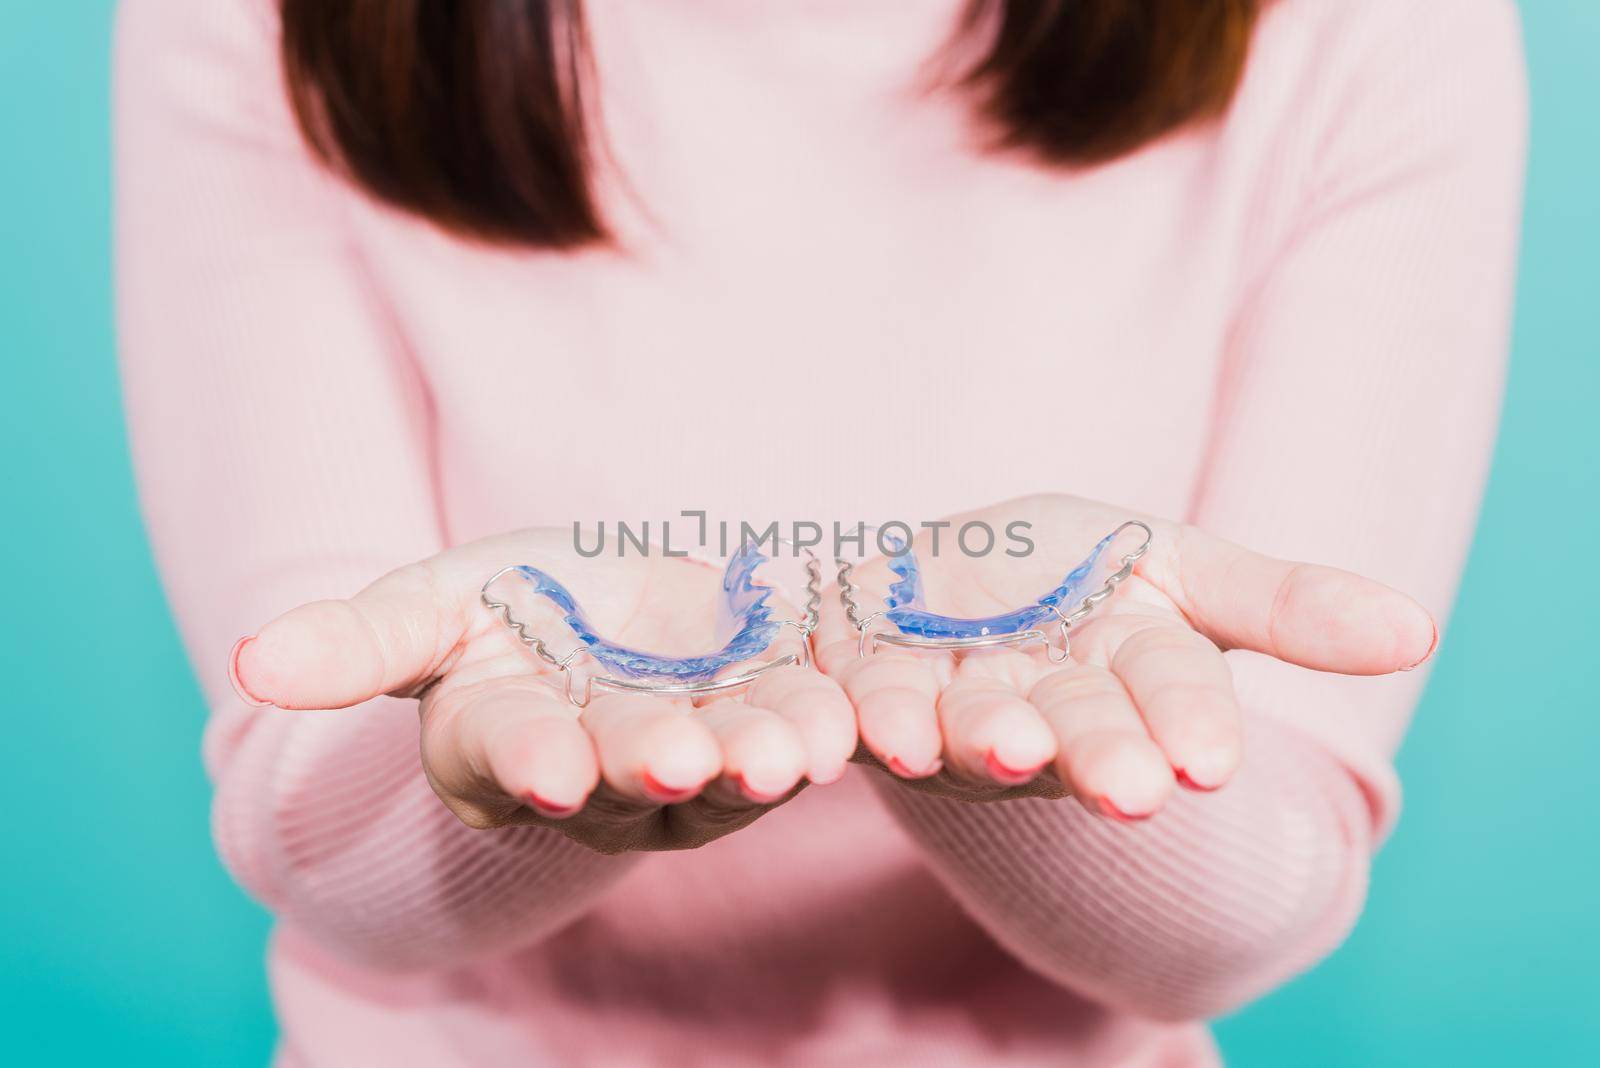 Close up hands of young woman holding silicone orthodontic retainers for teeth, Teeth retaining tools after removable braces, isolated blue background, Dental hygiene healthy care concept